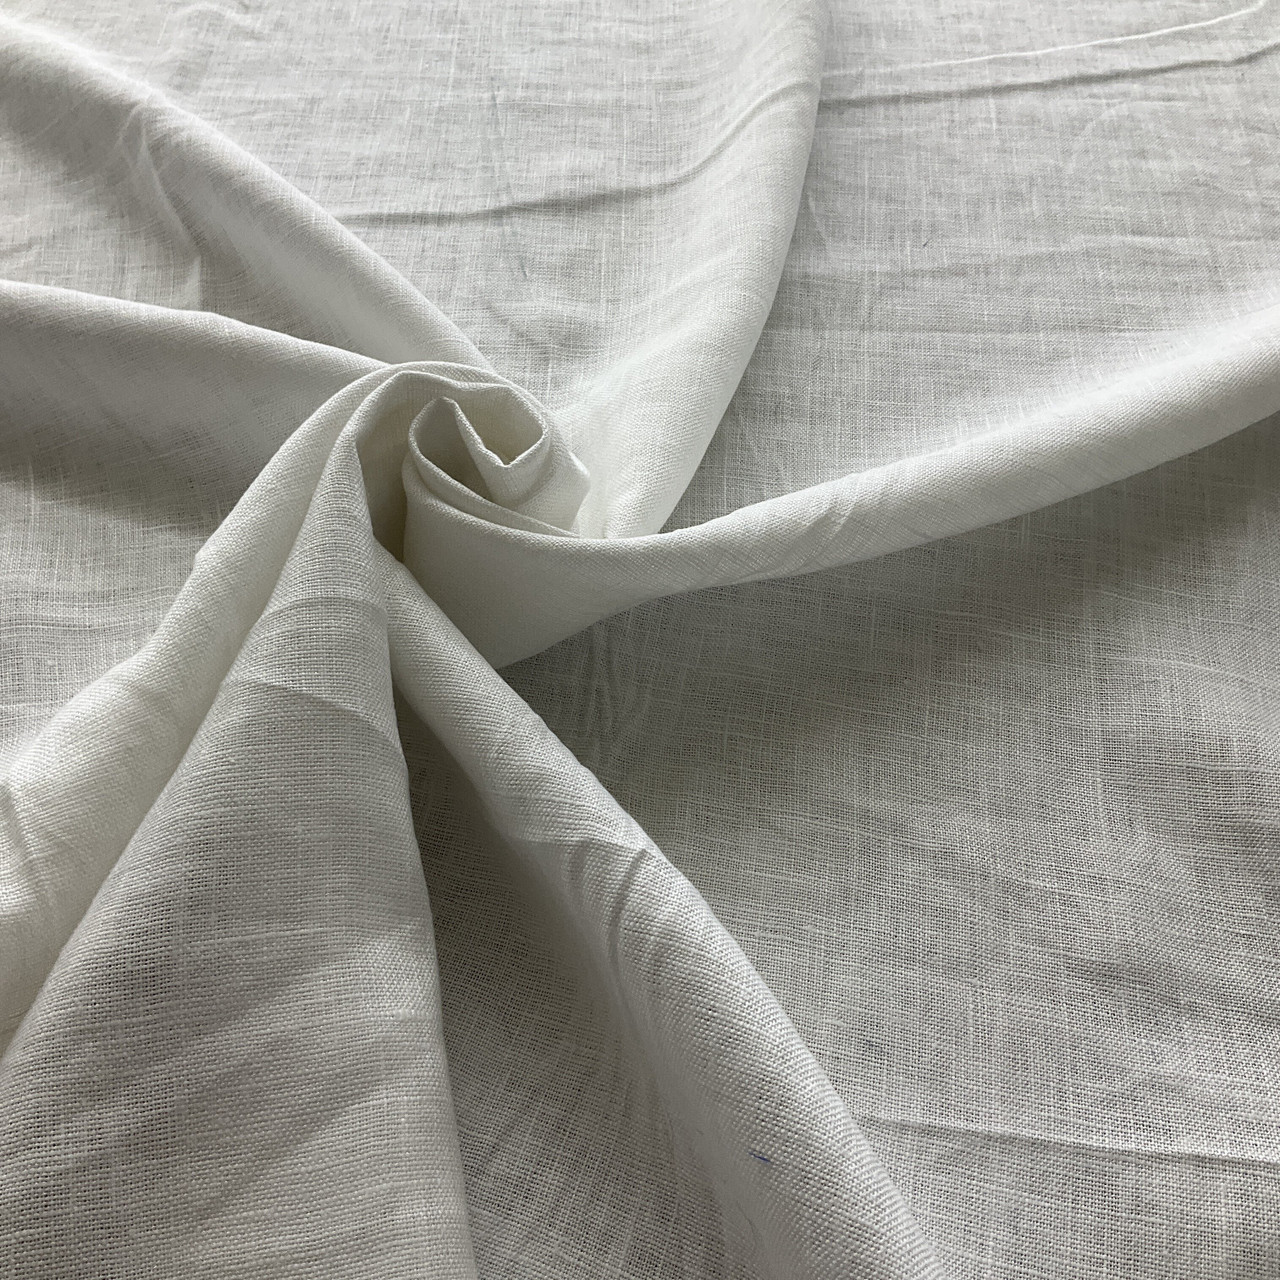  Pure 100% White Thick Linen Fabric 280gsm Sold by Fabric